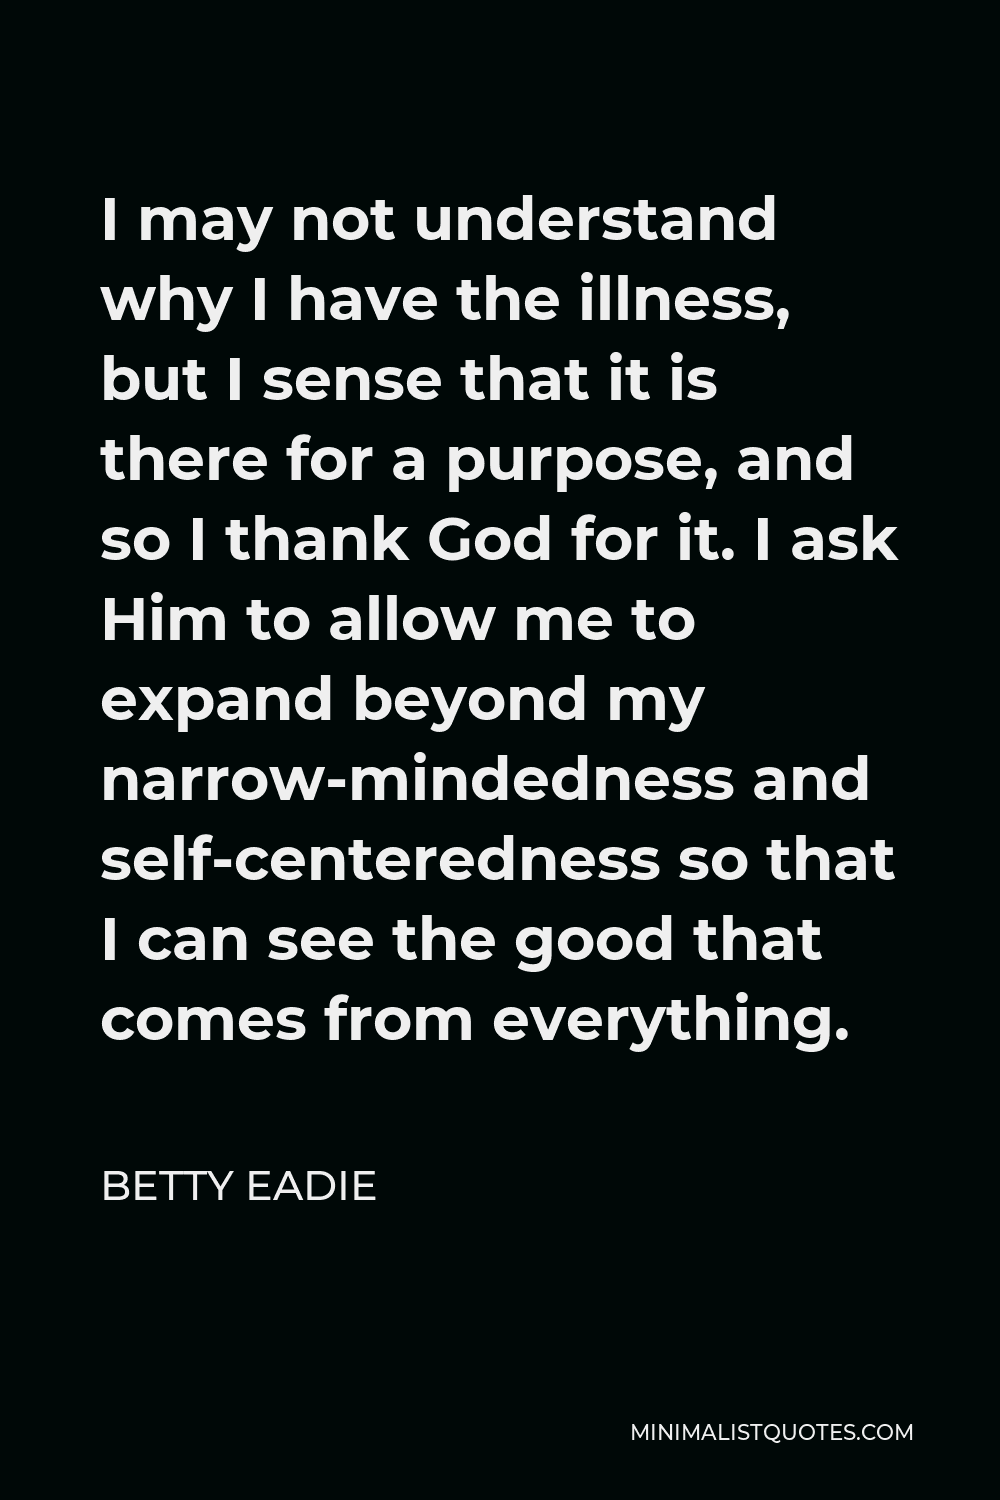 Betty Eadie Quote - I may not understand why I have the illness, but I sense that it is there for a purpose, and so I thank God for it. I ask Him to allow me to expand beyond my narrow-mindedness and self-centeredness so that I can see the good that comes from everything.